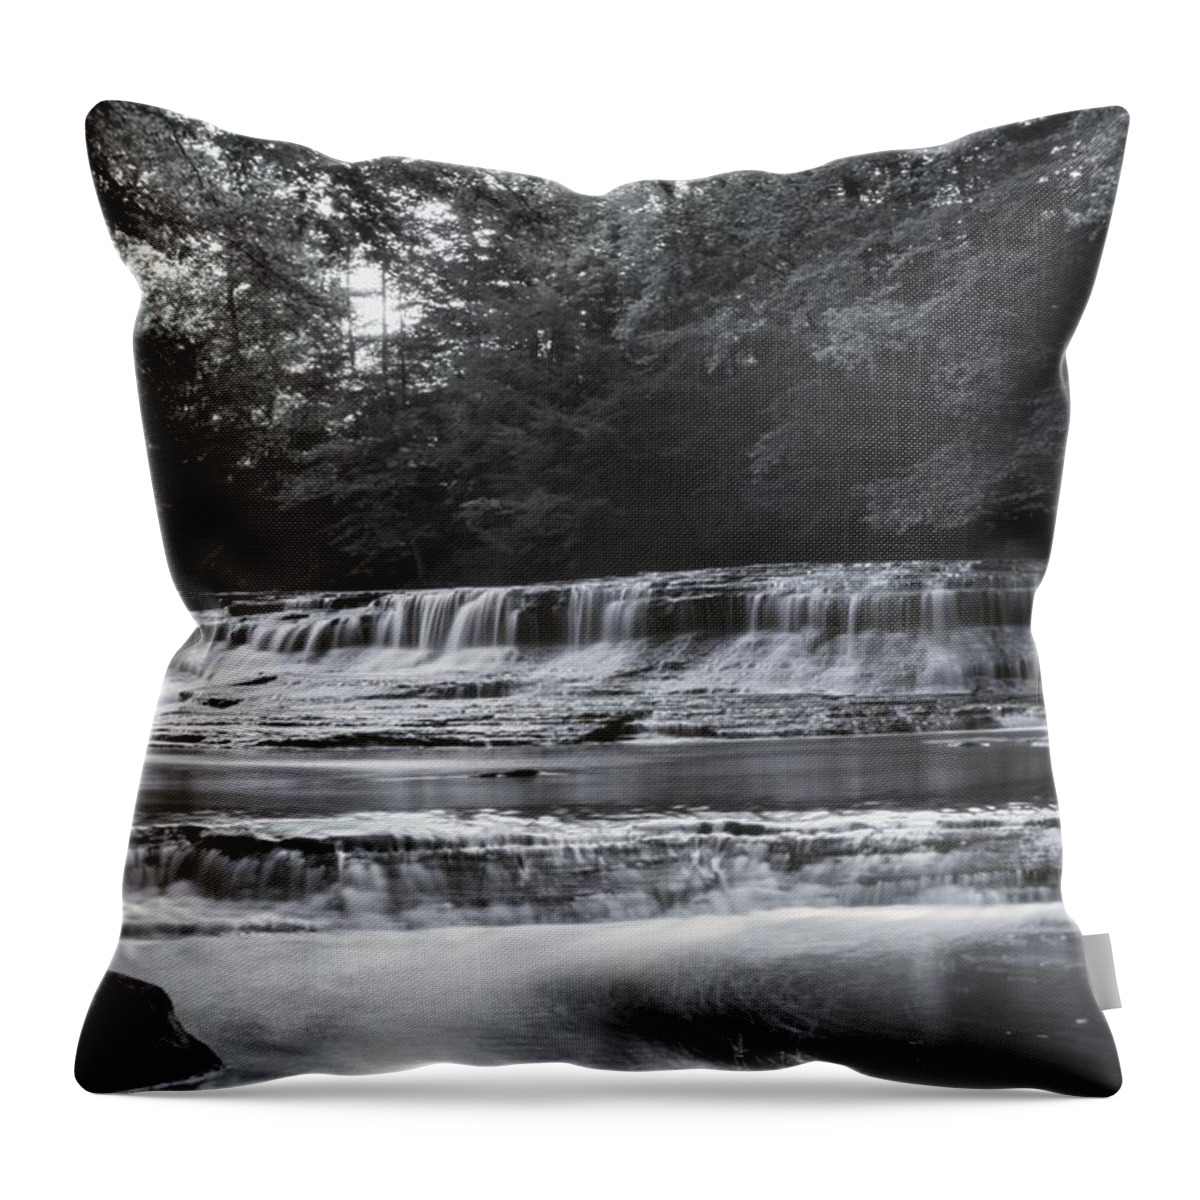  Throw Pillow featuring the photograph South Chagrin by Brad Nellis